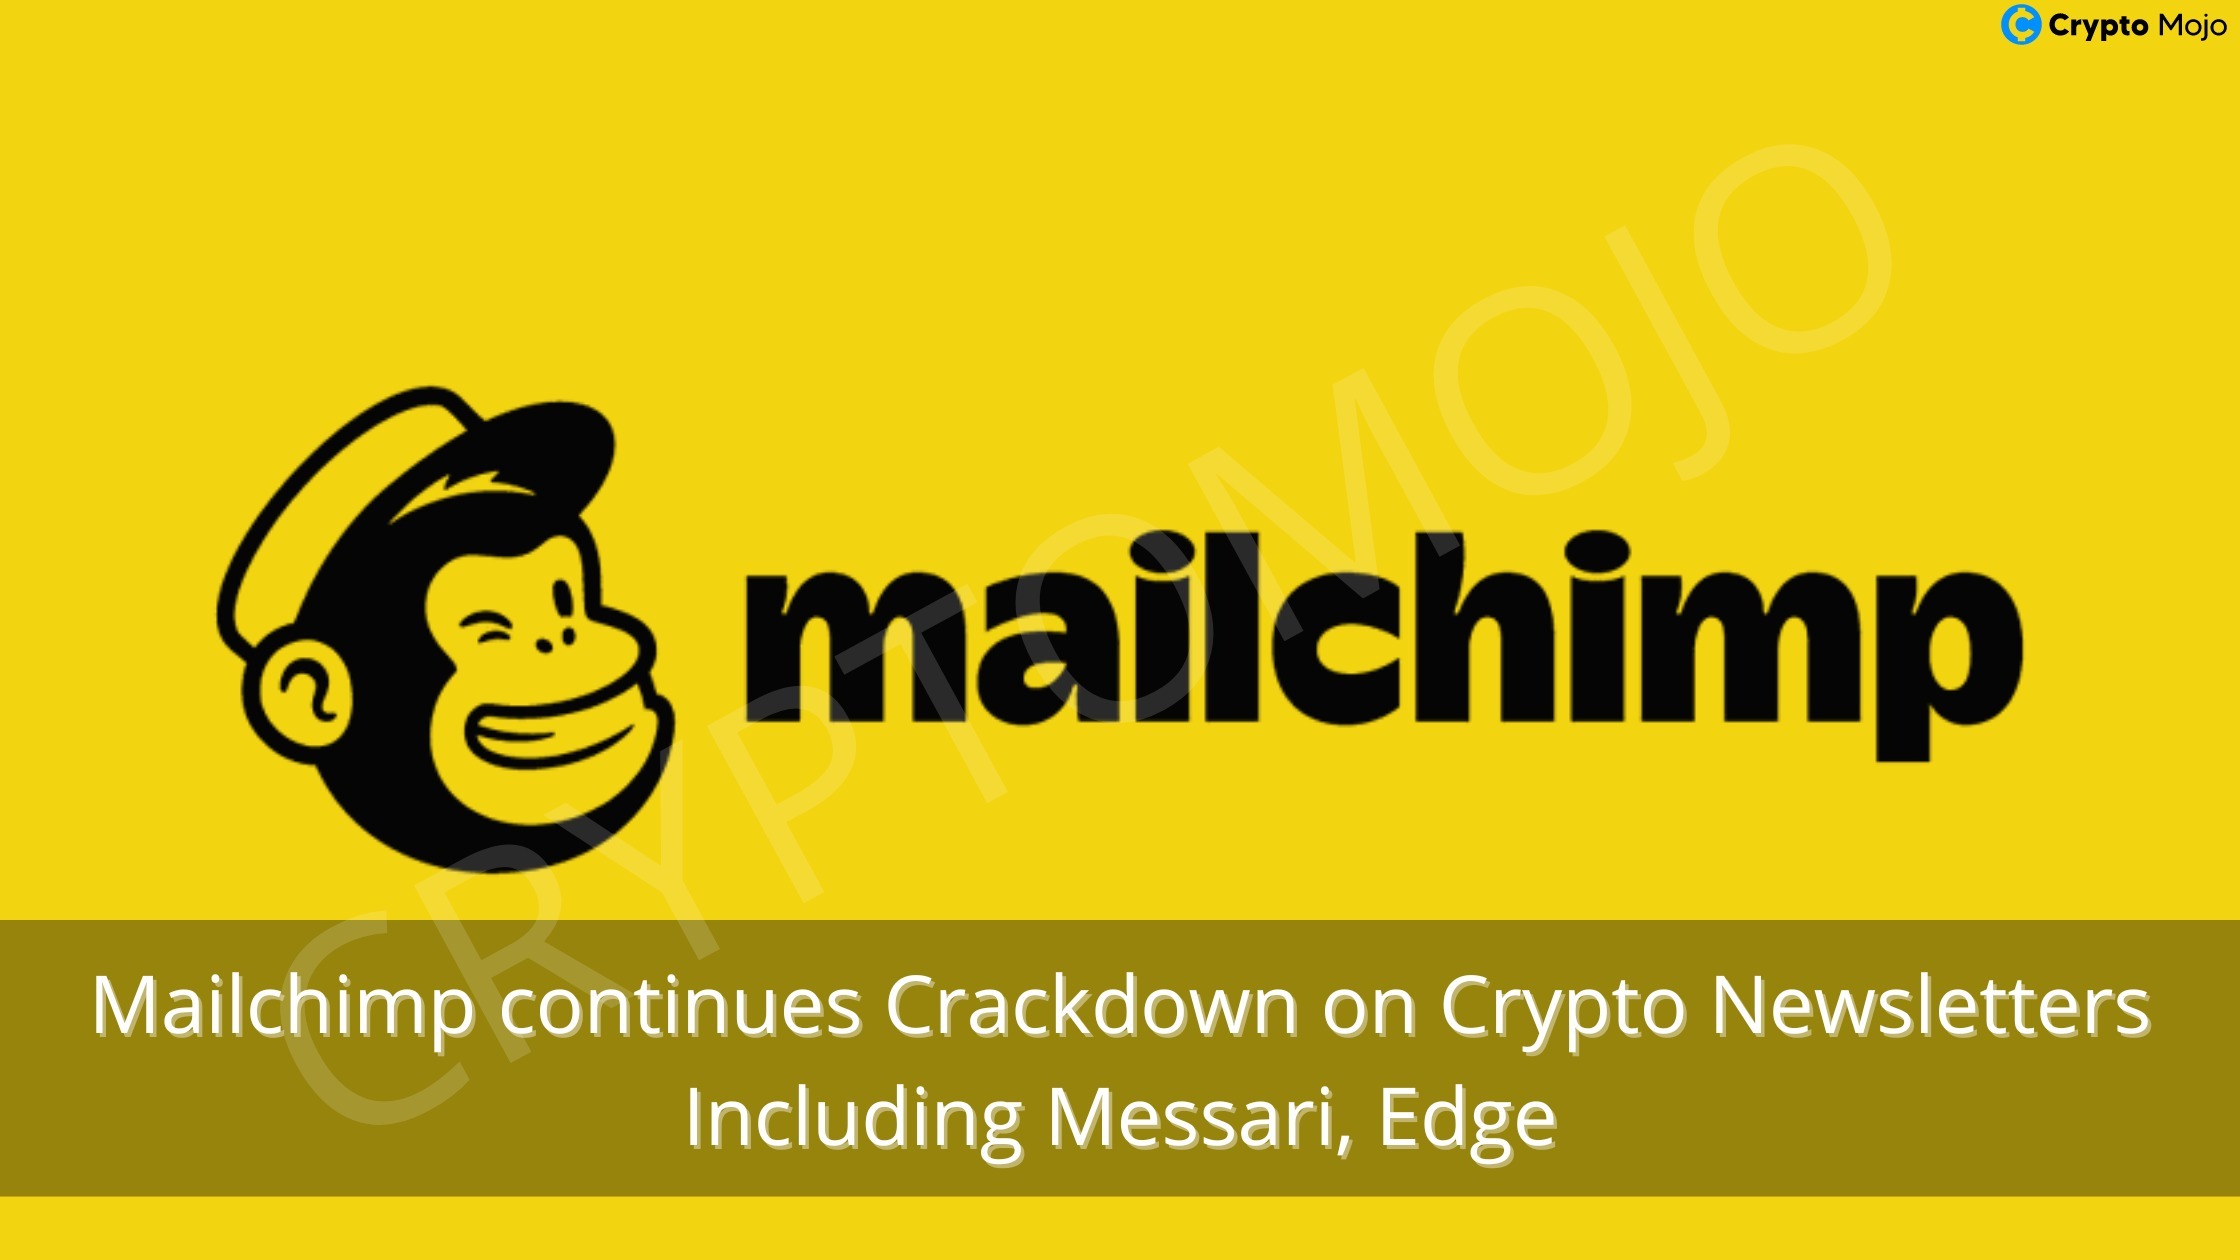 Mailchimp Continues Crackdown On Crypto Newsletters Including Messari, Edge